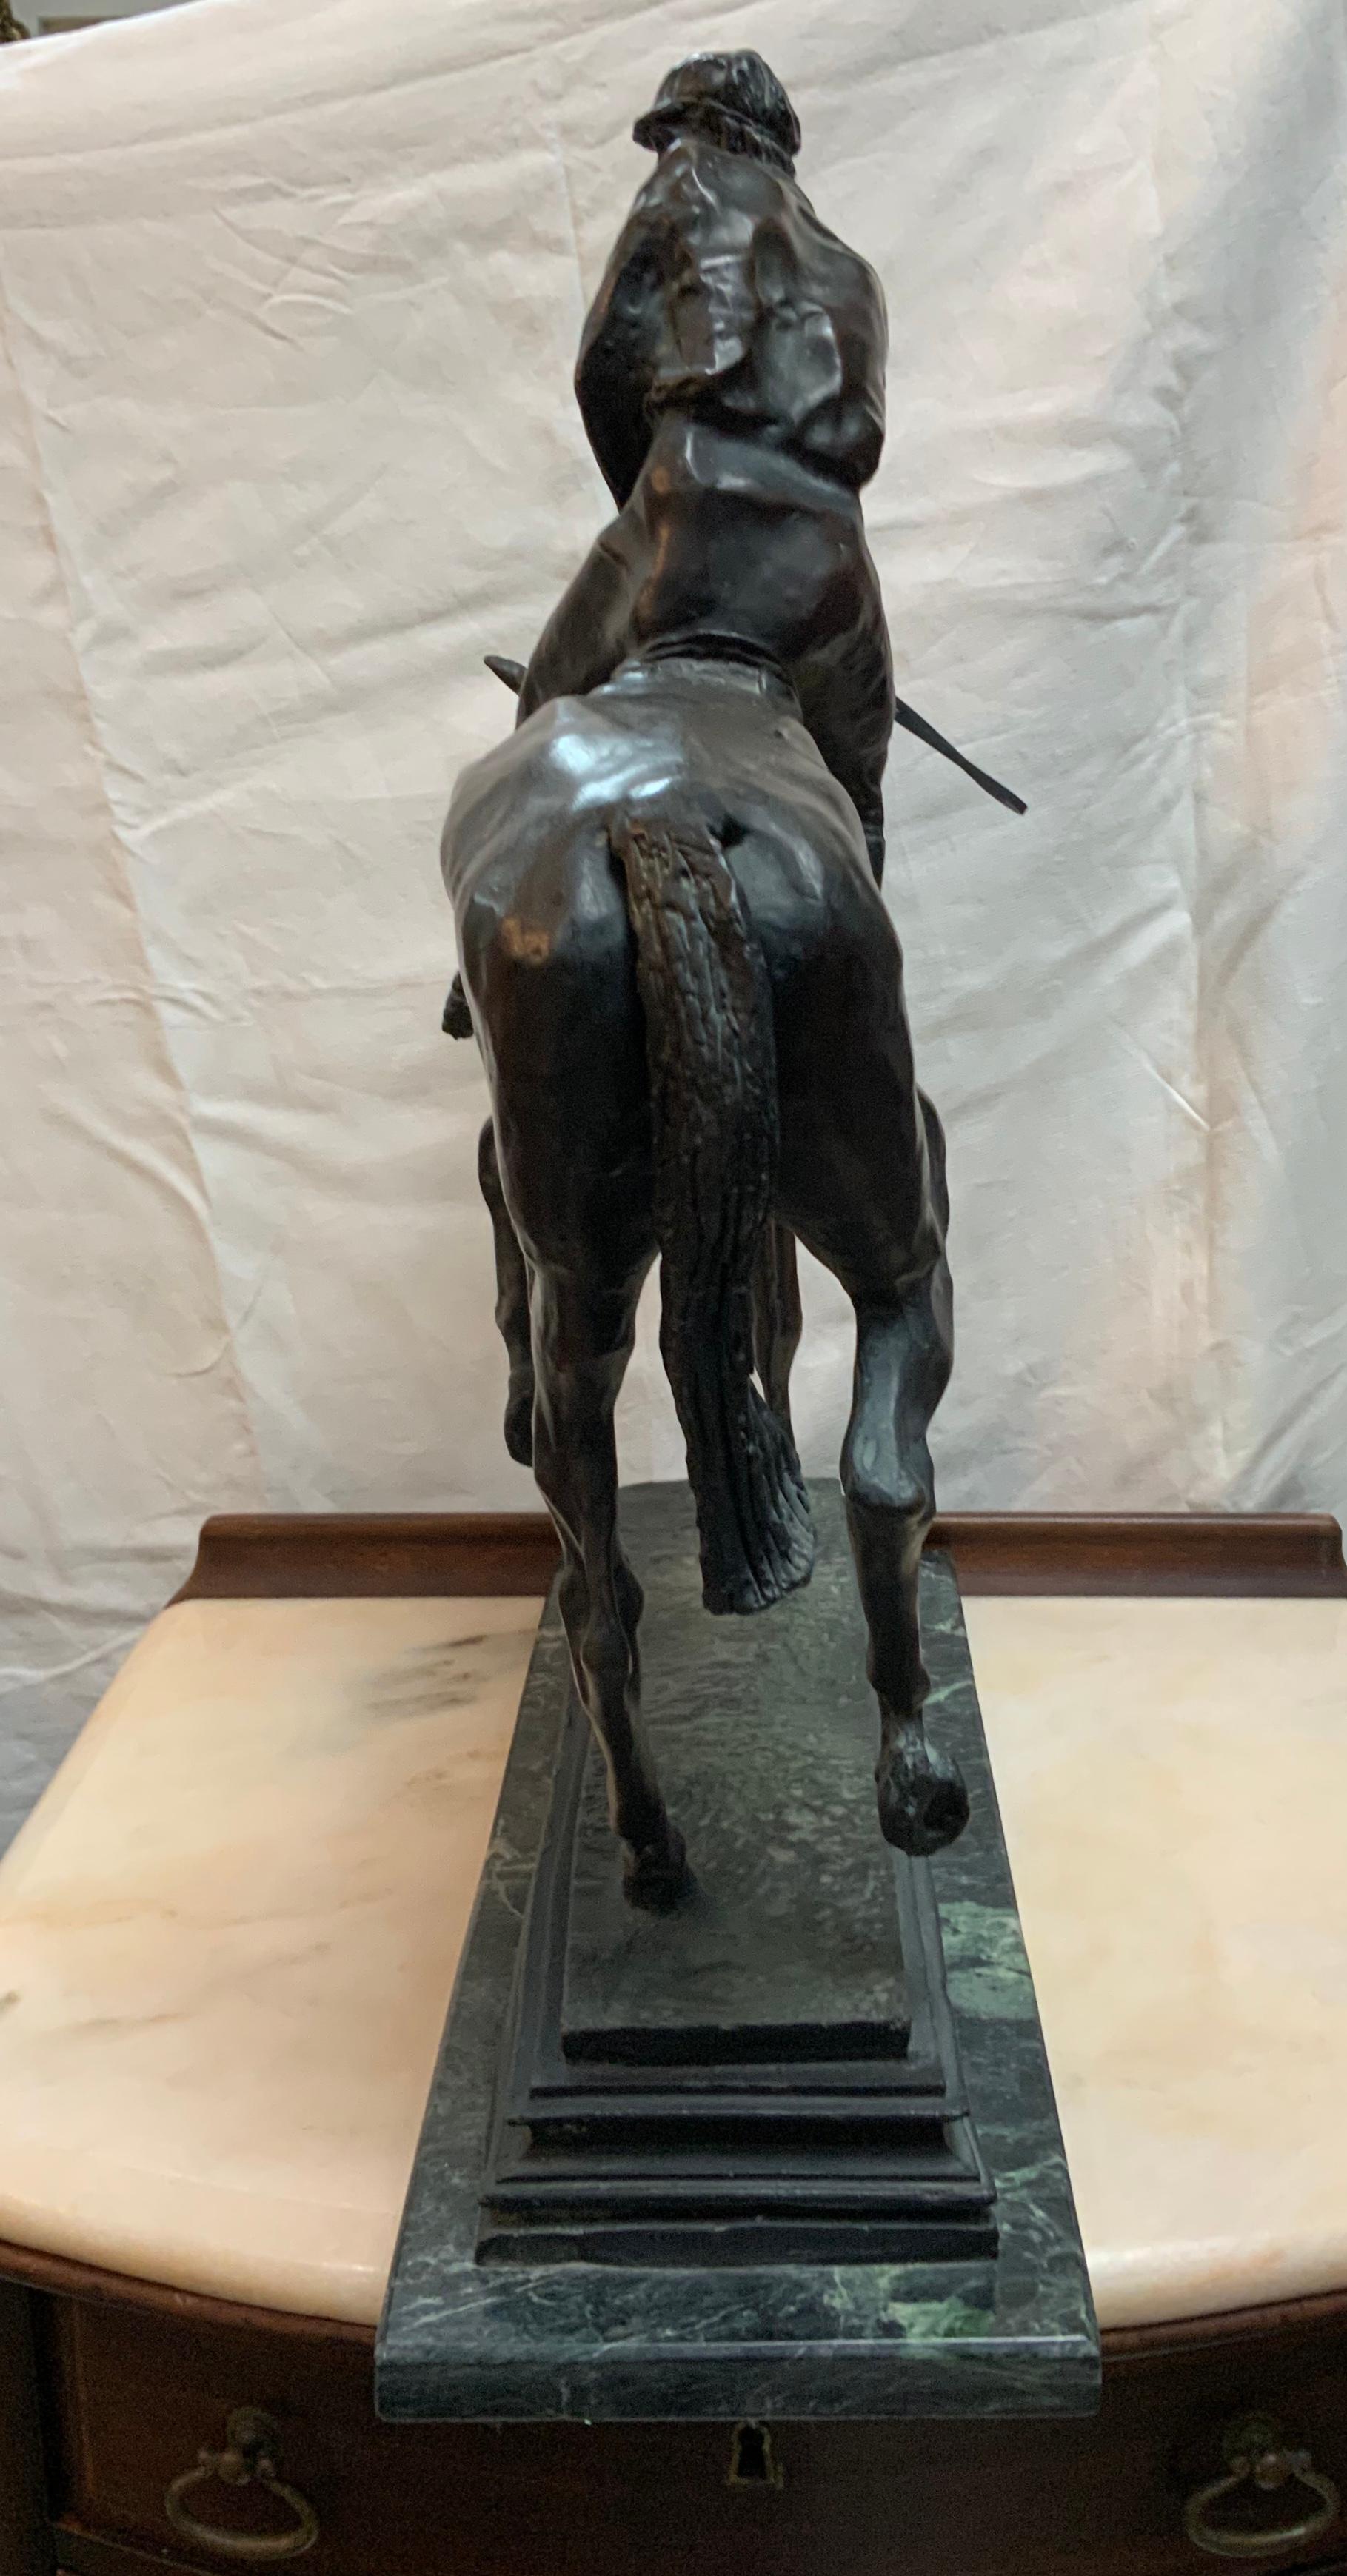 Cast Patinated Bronze Sculpture of Le Grand Jockey by Isidore J. Bonheur